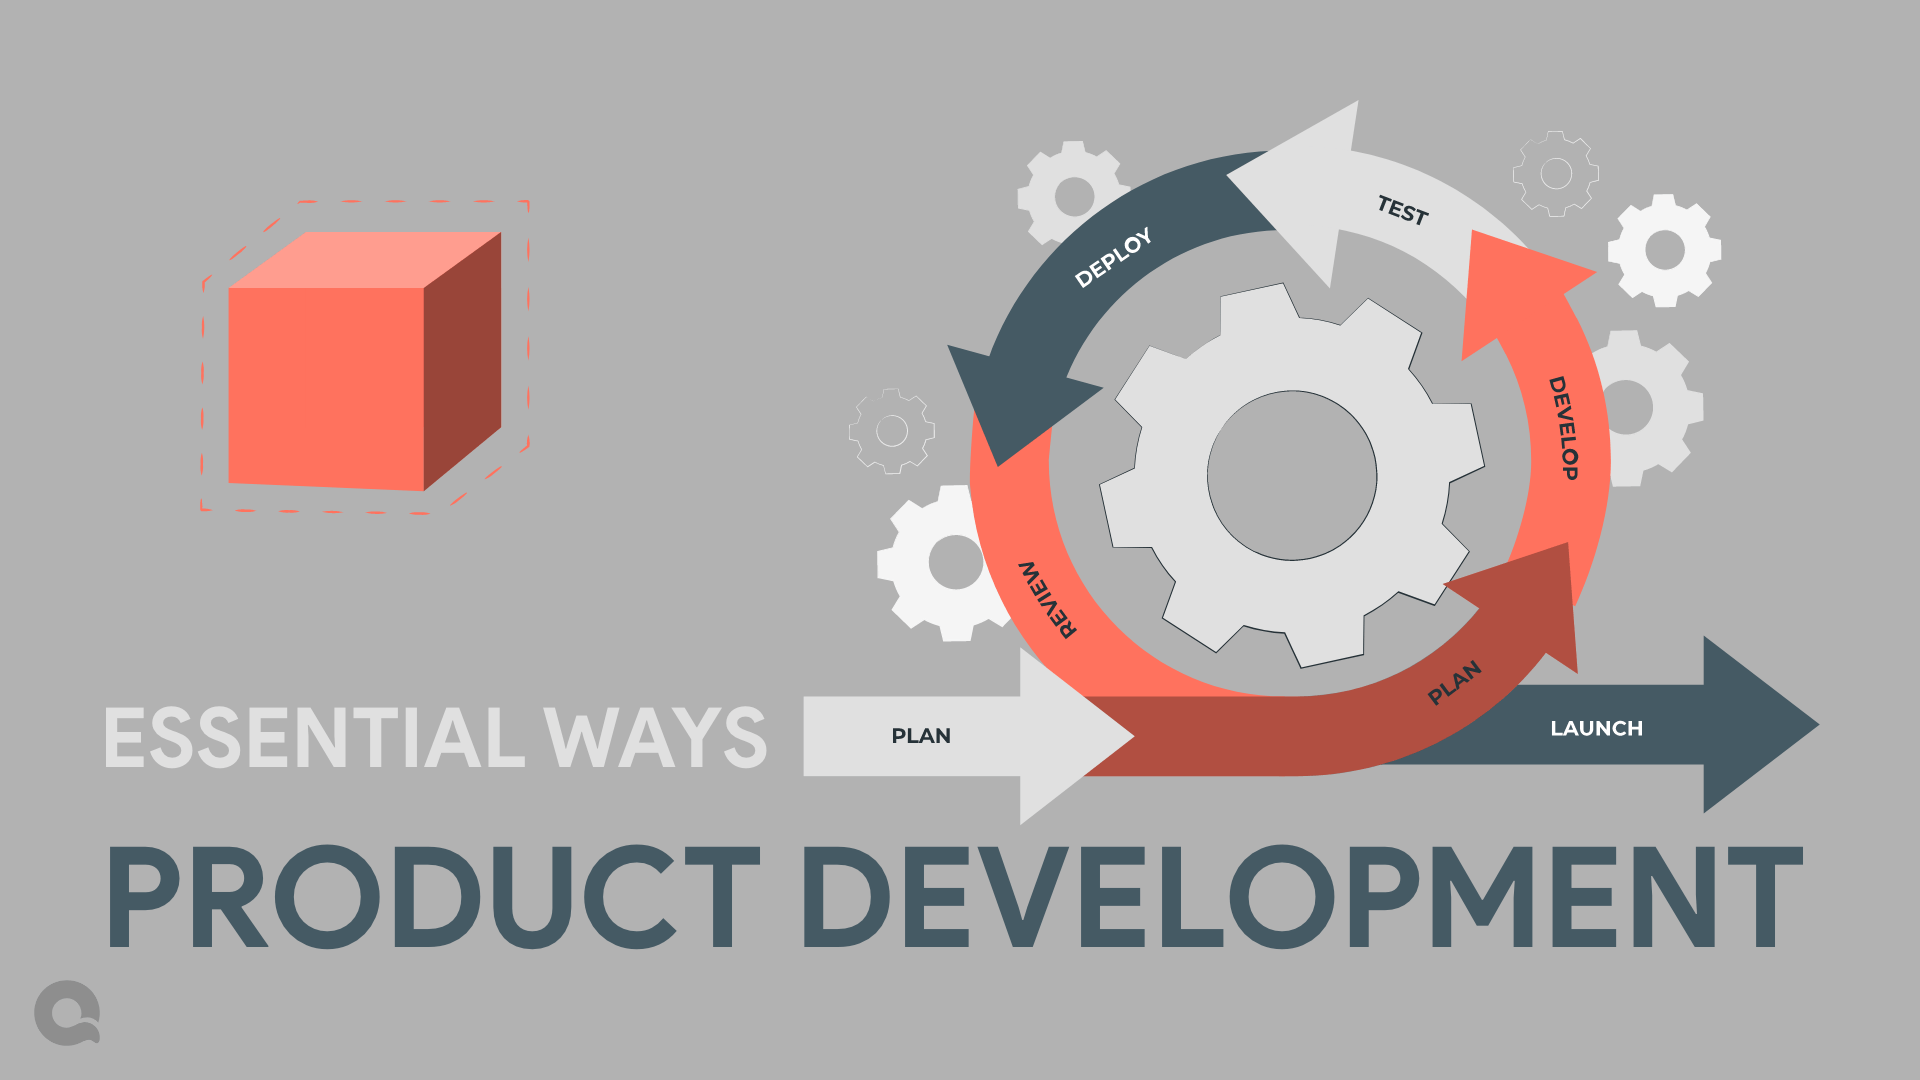 What are the essential ways of Product Development